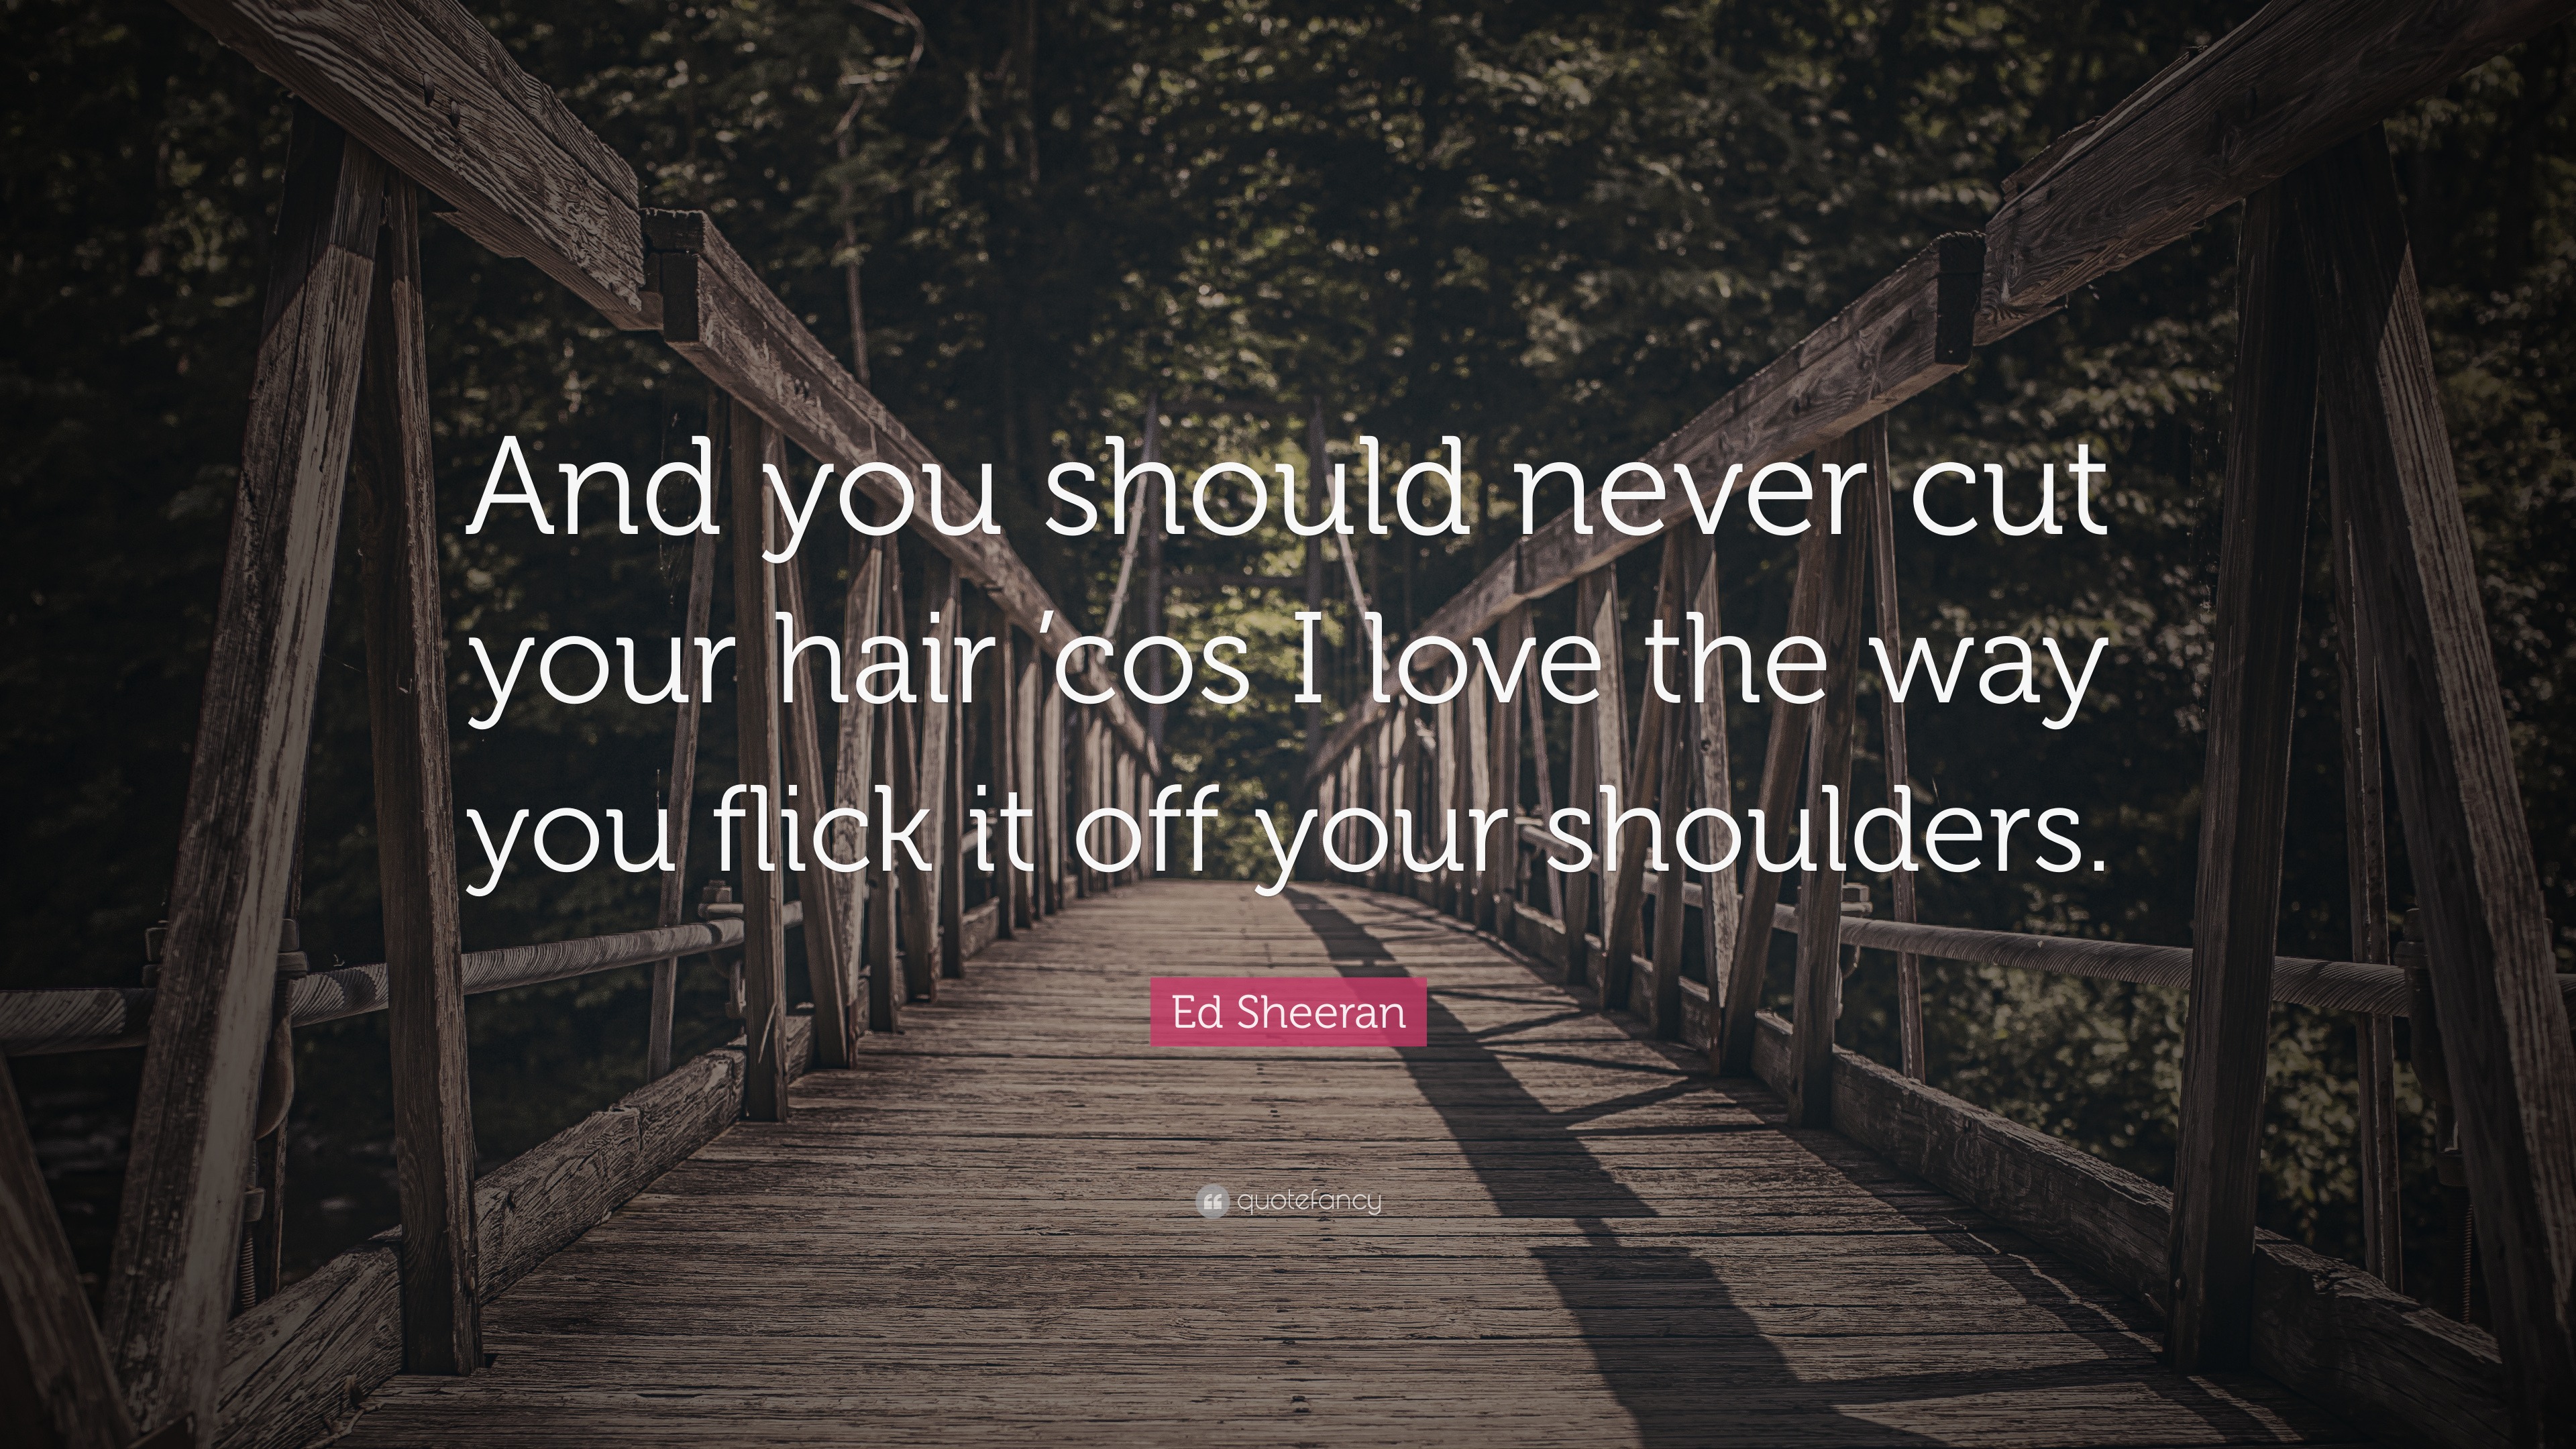 Ed Sheeran Quote: “And you should never cut your hair 'cos I love the way  you